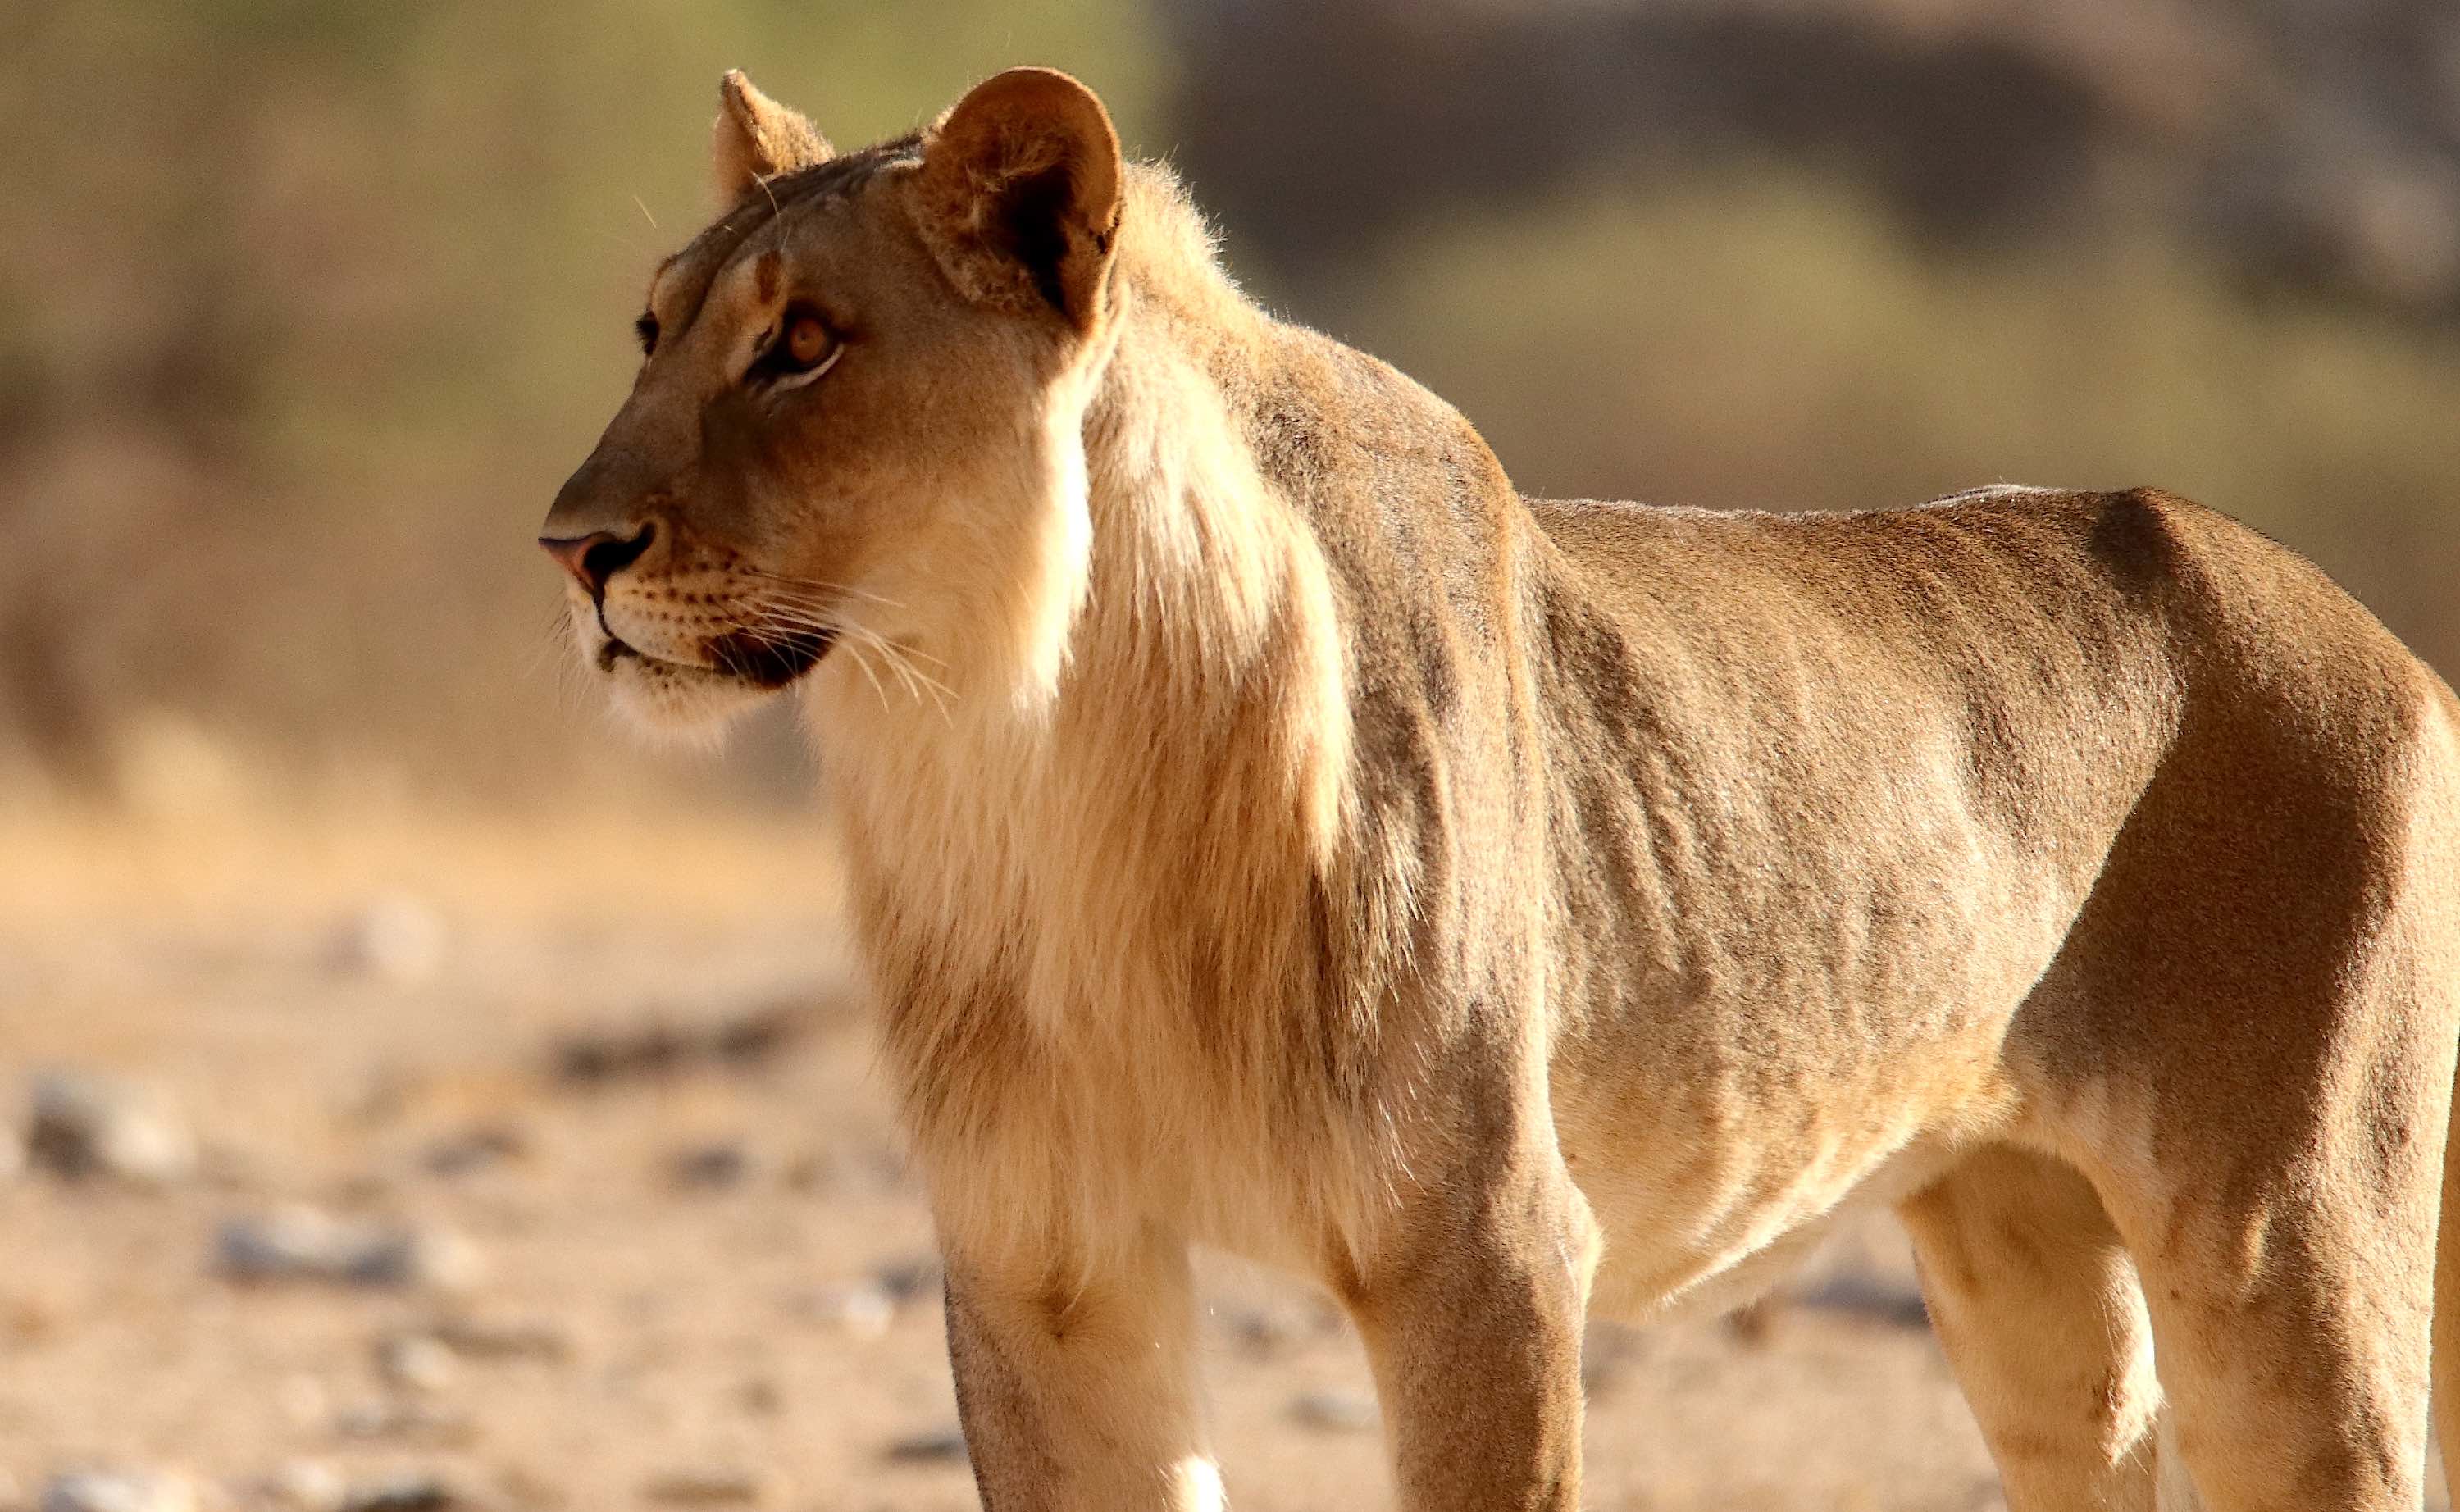 A wonderful side view of a Namibian desert-adapted lion.